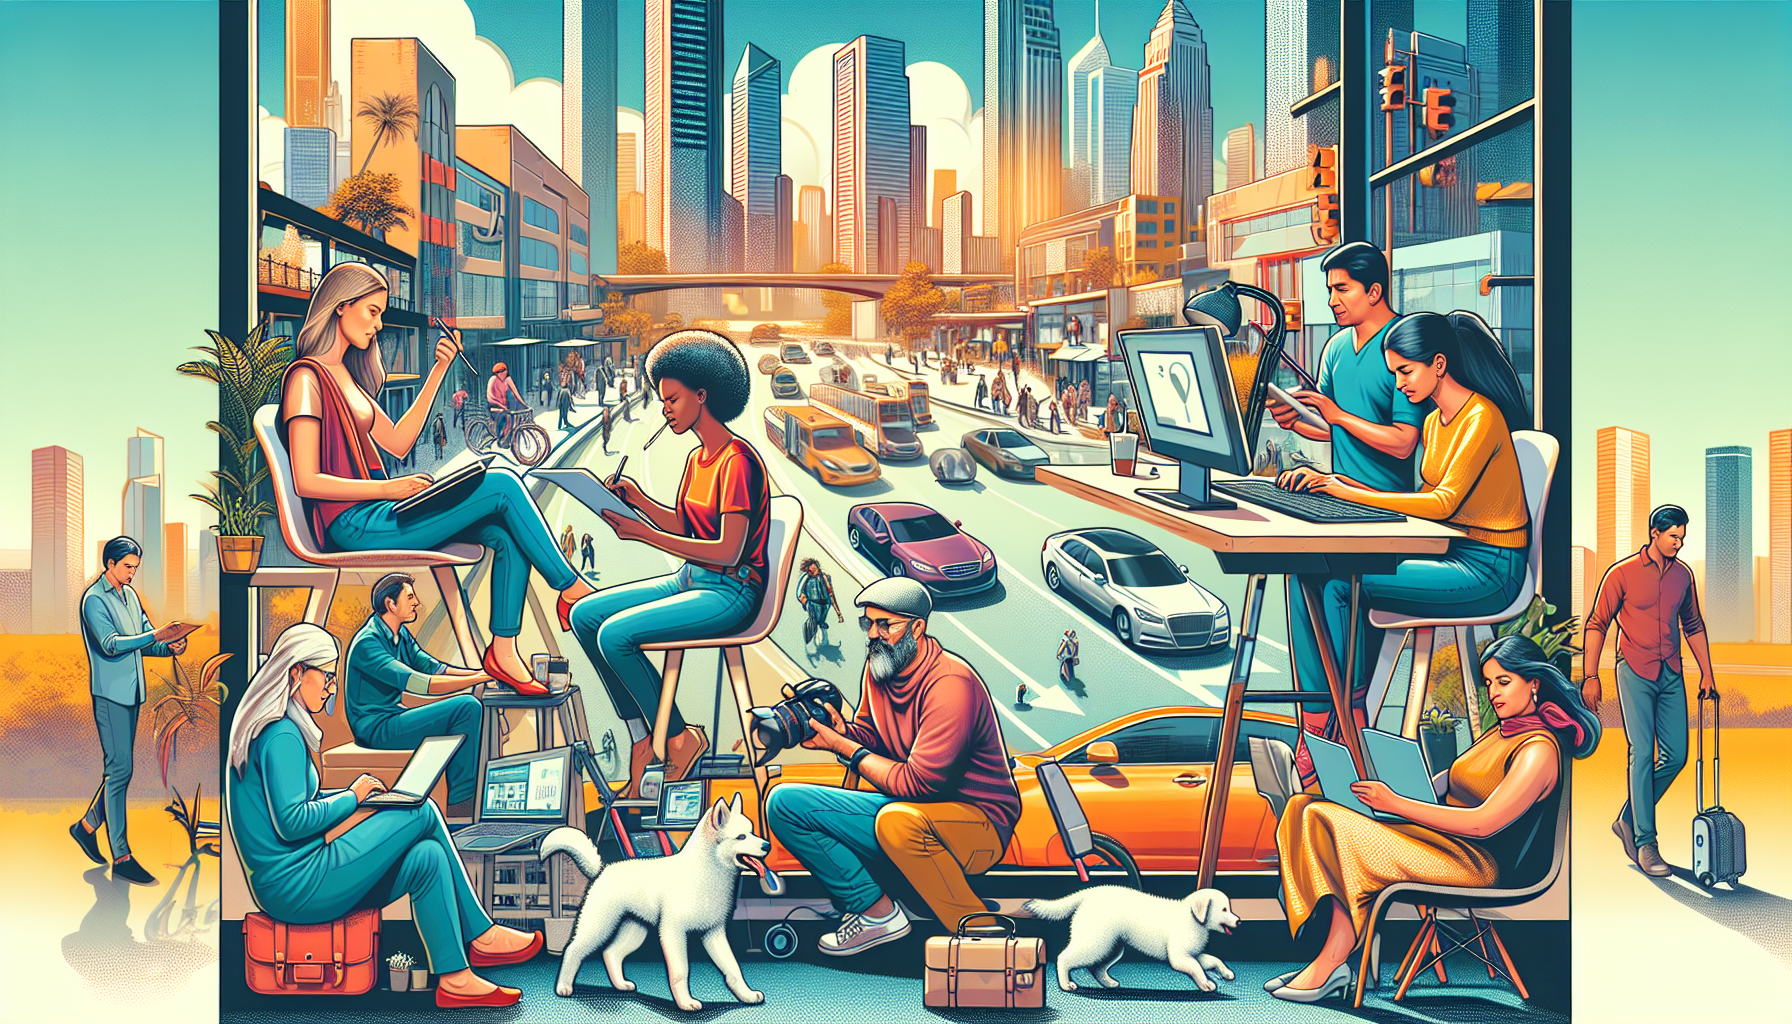 Create an image showcasing a vibrant, modern workspace with a variety of people engaged in different side jobs. Include activities such as freelance graphic design on a tablet, online tutoring, someone driving for a ride-sharing service, a person walking a dog, and another taking photographs. The background should depict a lively cityscape with hints of both technological advancement and personal engagement.